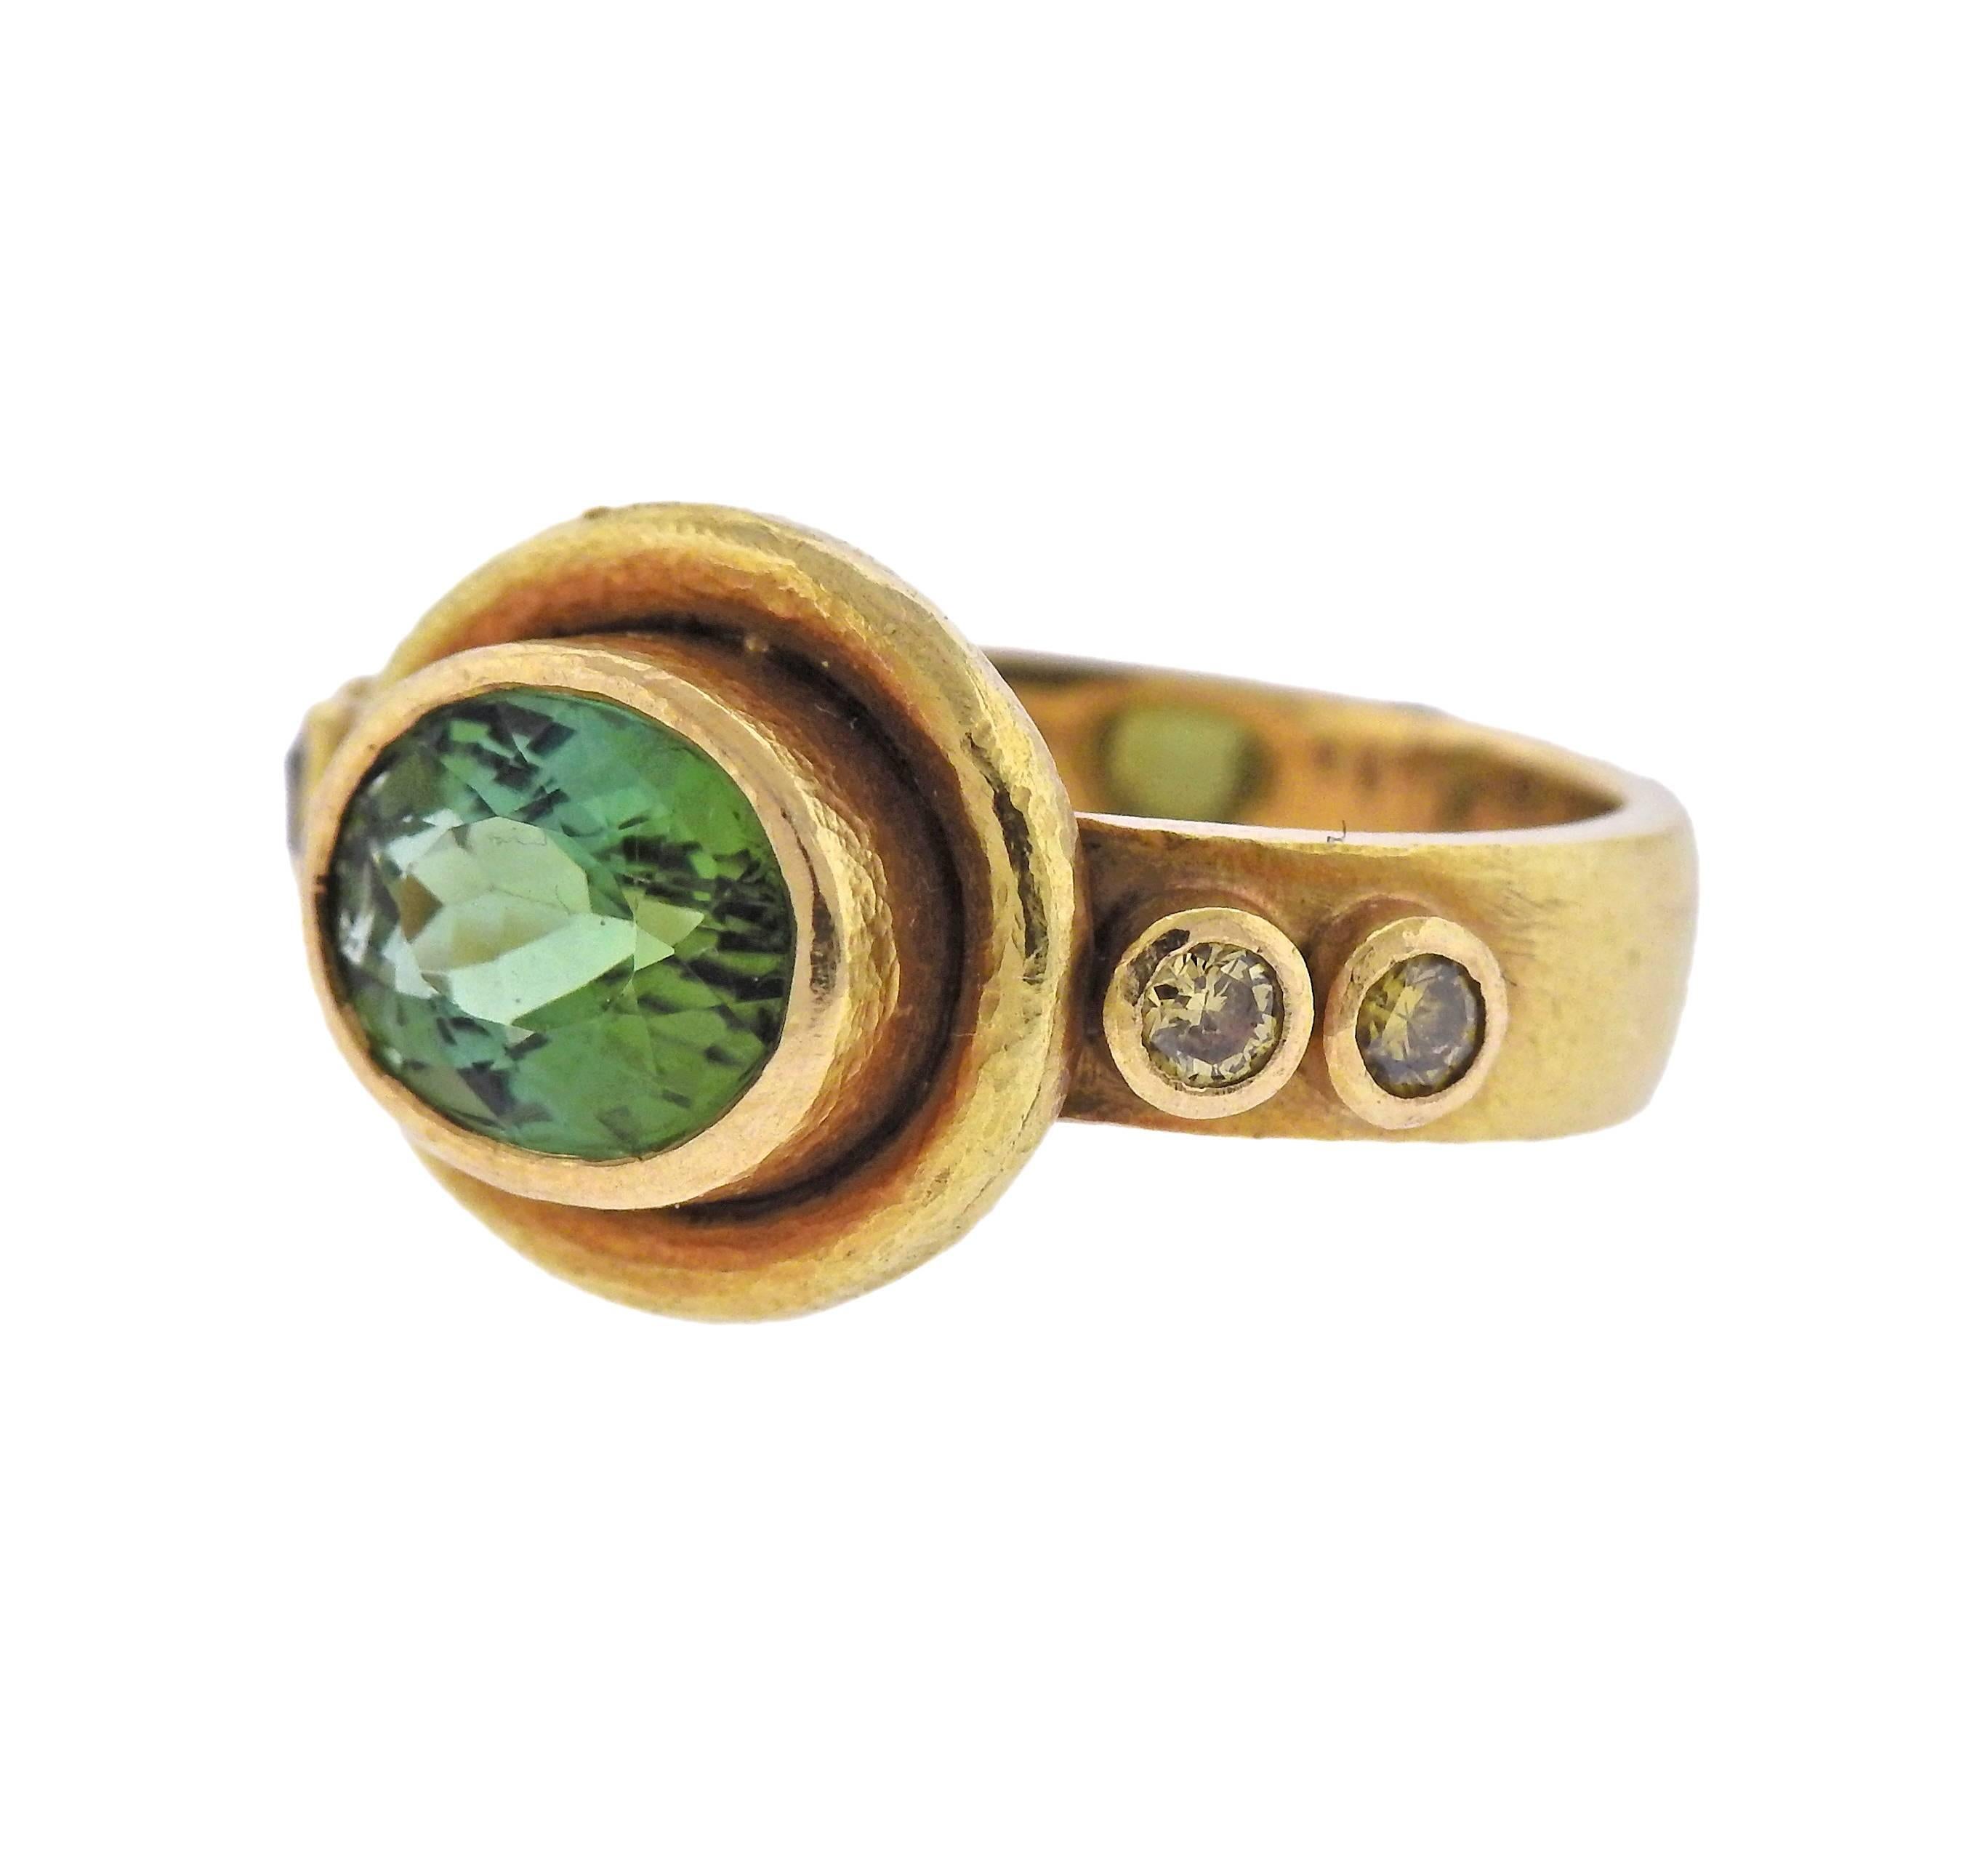 18k yellow gold ring, crafted by Elizabeth Locke, decorated with green beryl, surrounded with fancy diamonds. Ring size - 5 1/2, ring top is 12.5mm x 14mm. marked with Locke mark and 18k. Weight - 8.2 grams  